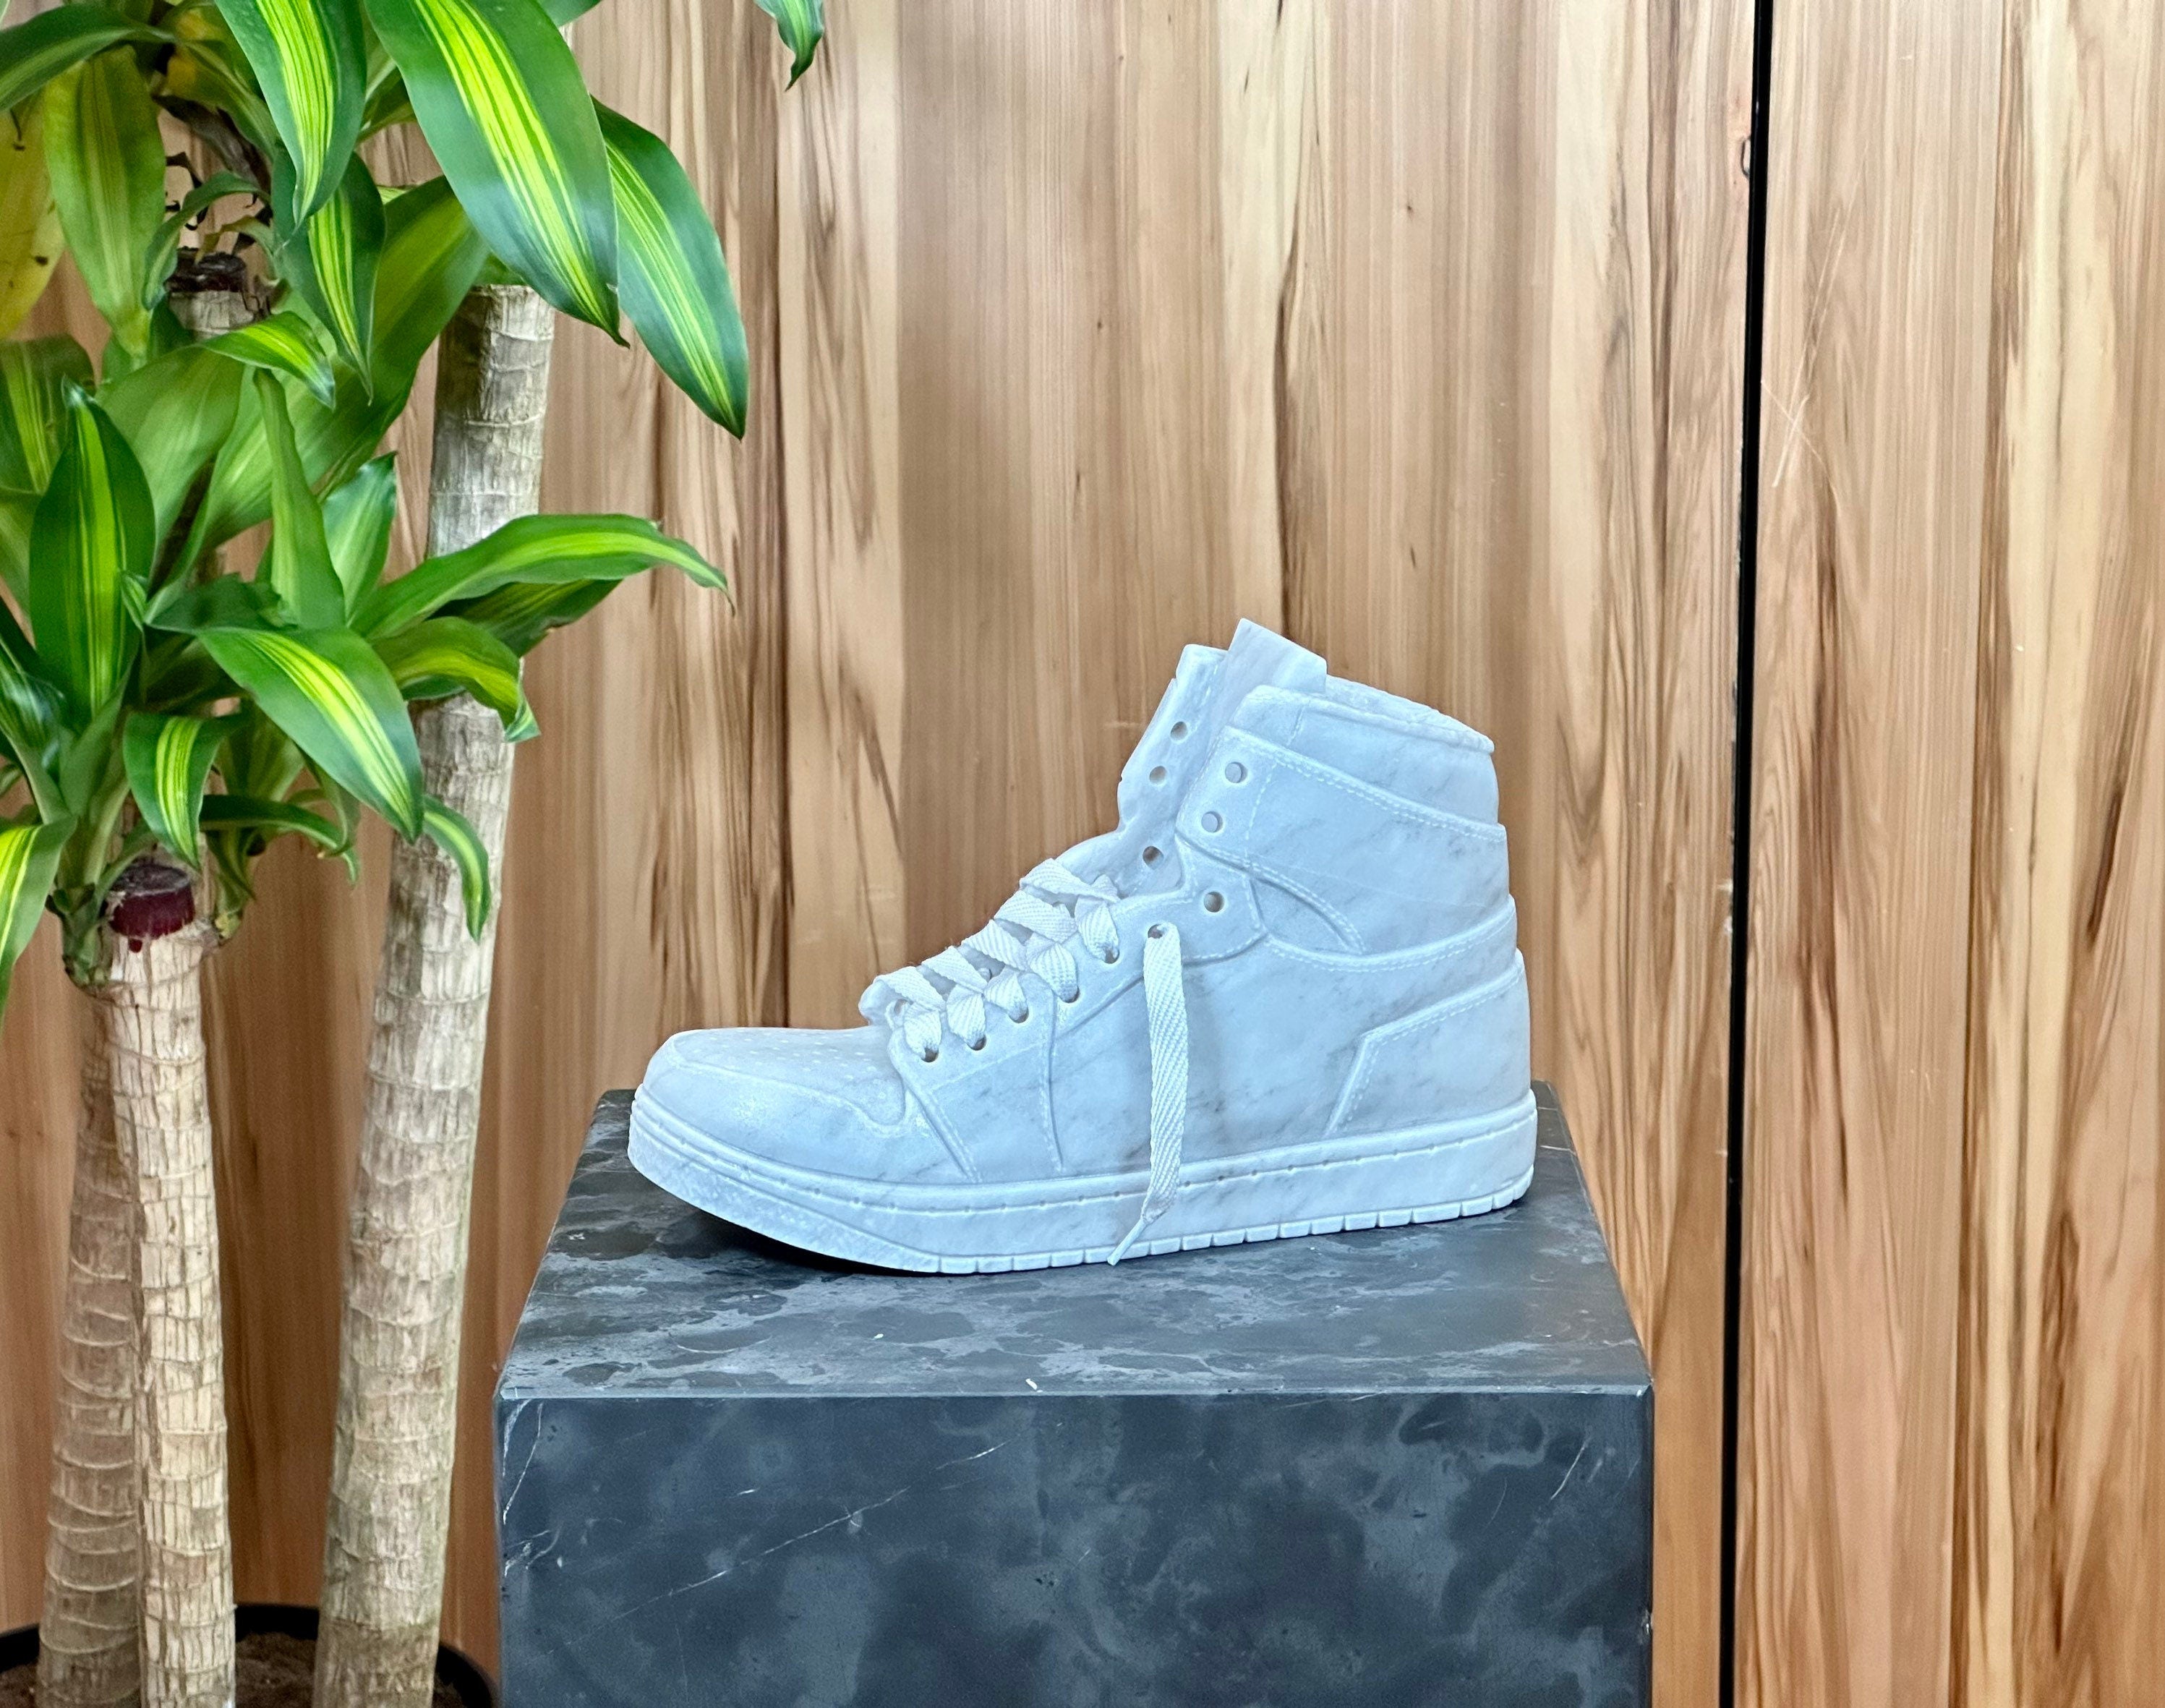 Marble Masterpiece - Handcrafted Statue of Timeless Nike Hightop Sneaker - Striking Statement Piece for Contemporary Interiors